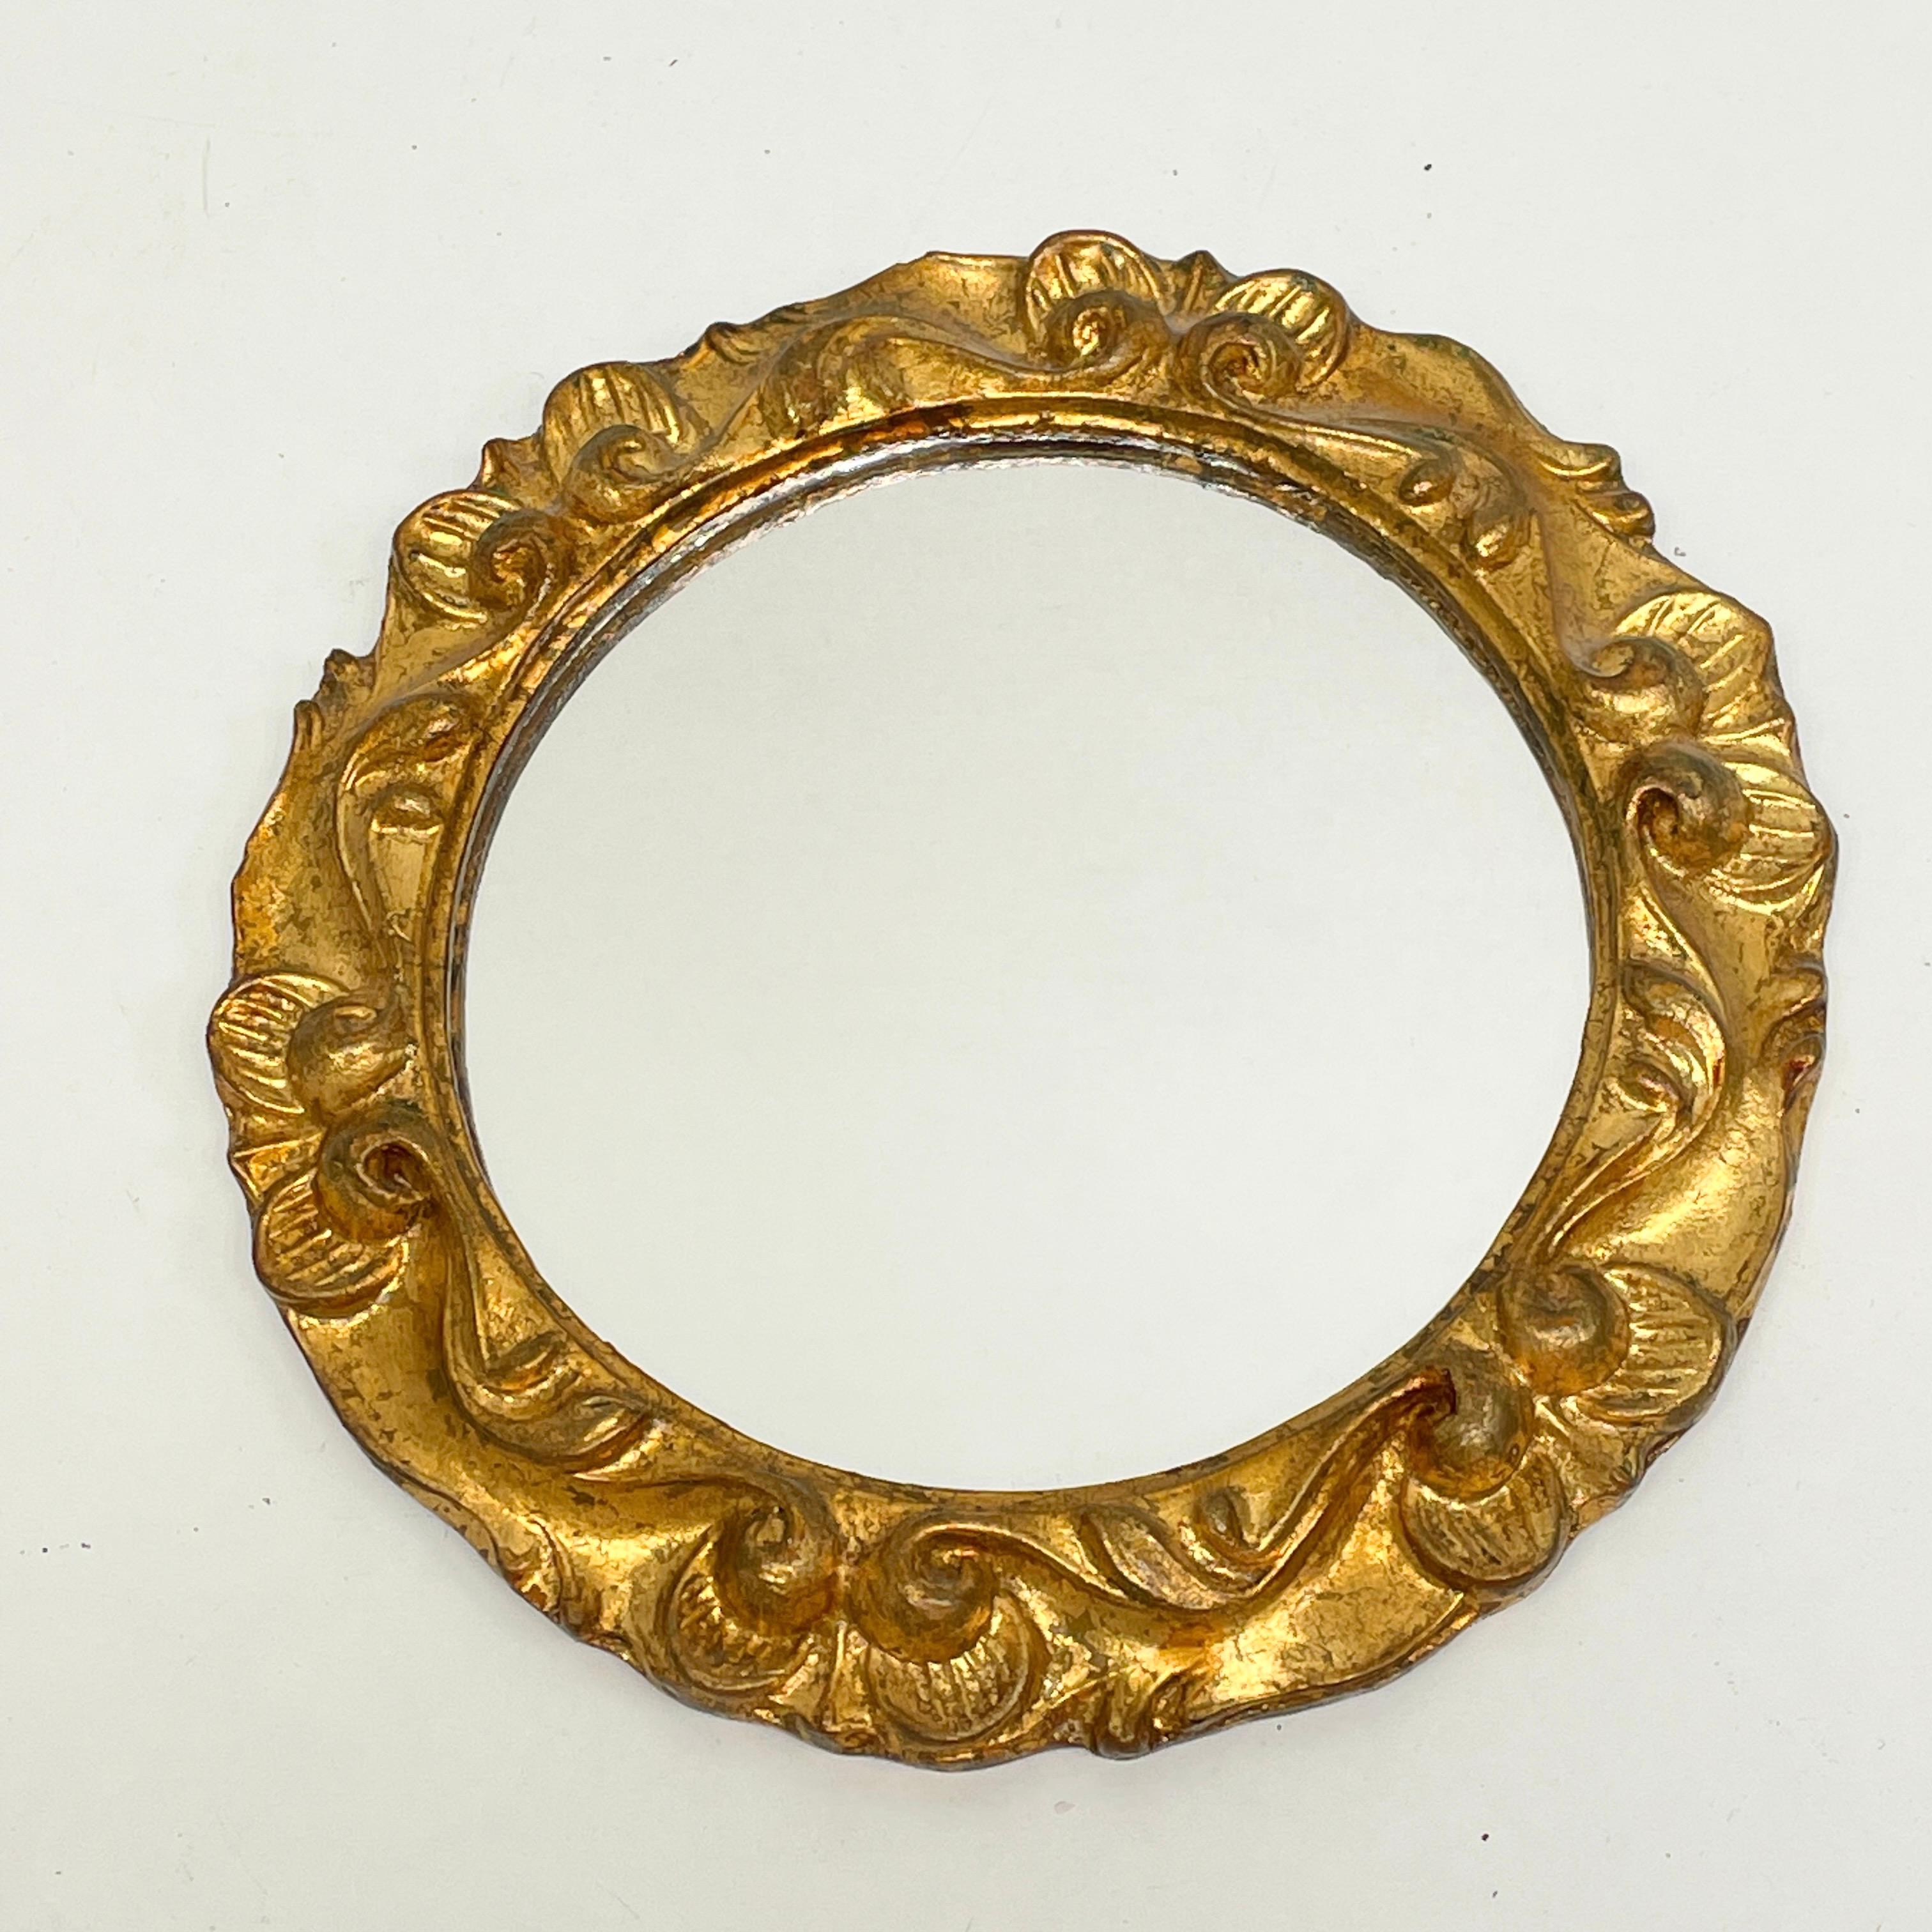 A gorgeous toleware mirror. Made of giltwood and composition. It measures approximate 9 1/4